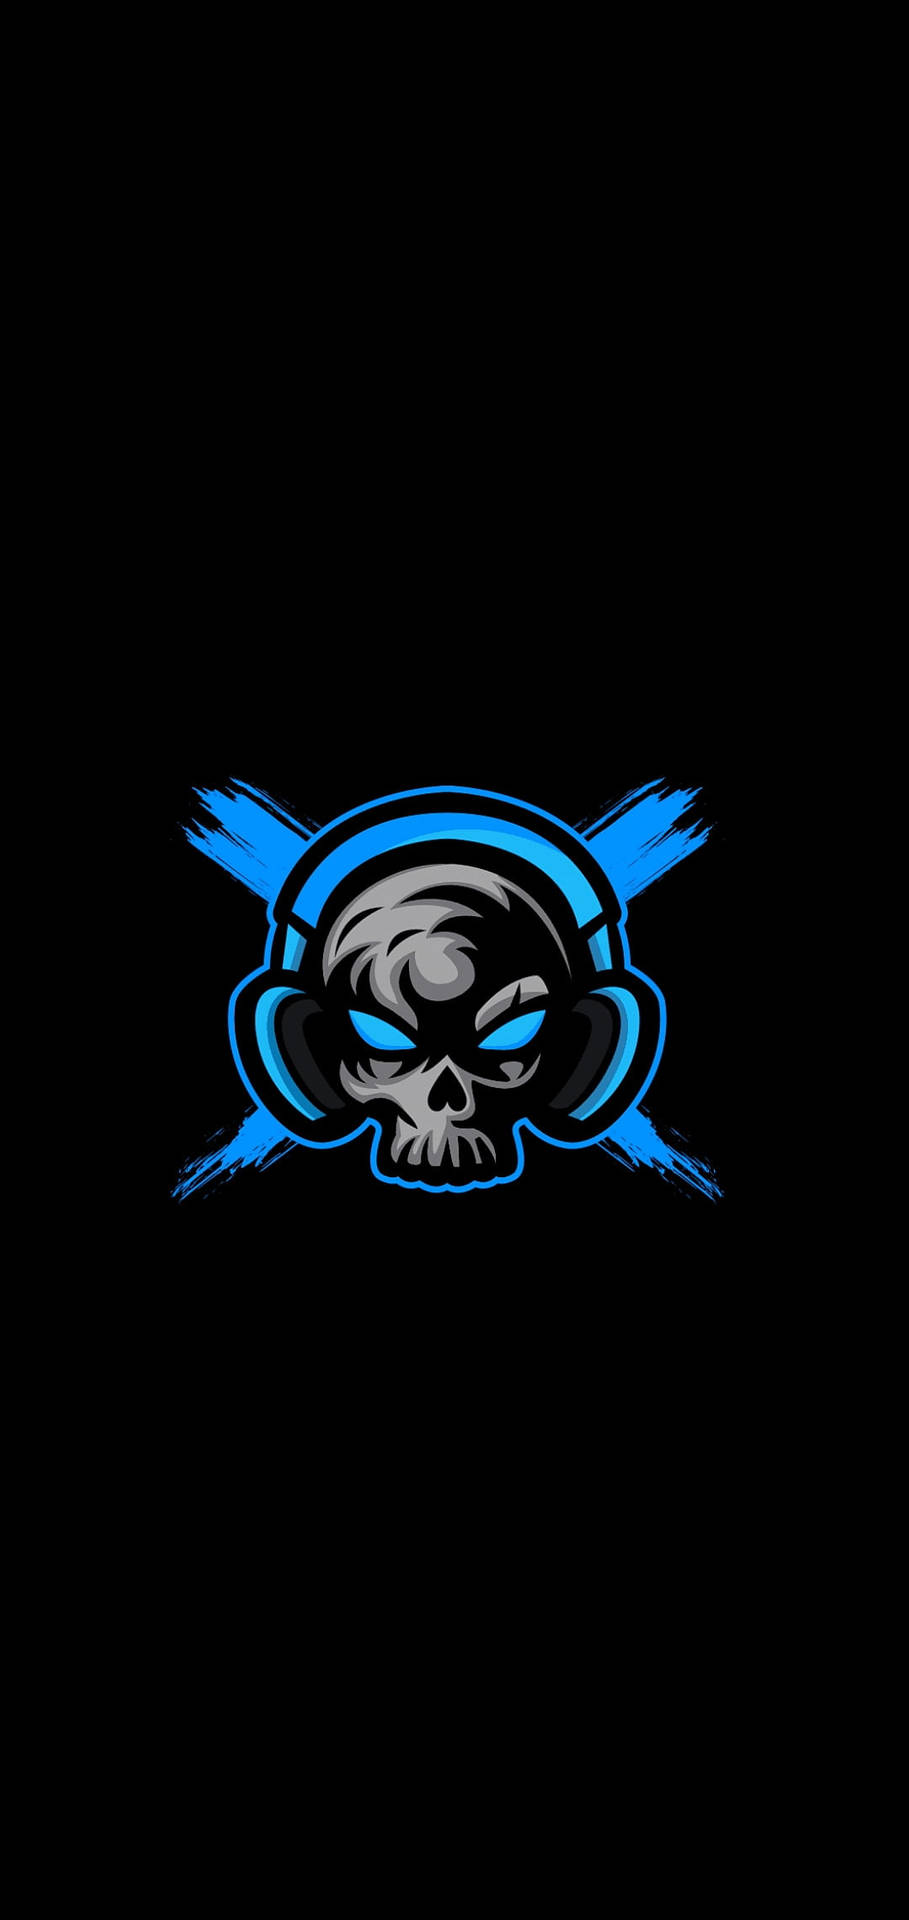 Enthralling Skull With Headphones Gaming Logo Hd